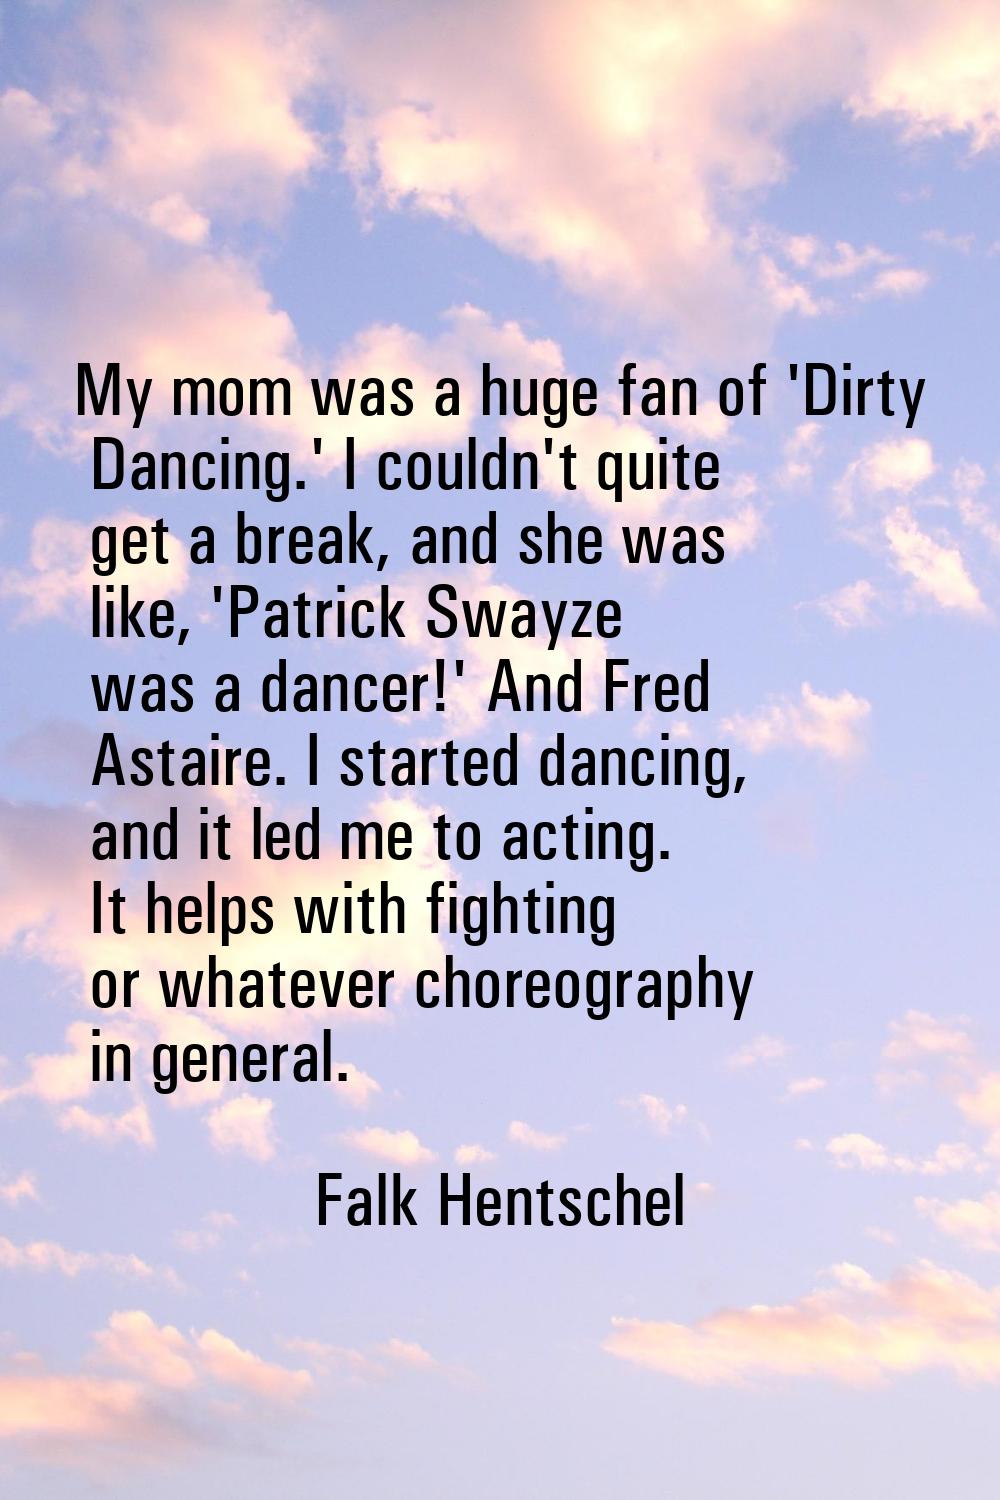 My mom was a huge fan of 'Dirty Dancing.' I couldn't quite get a break, and she was like, 'Patrick 